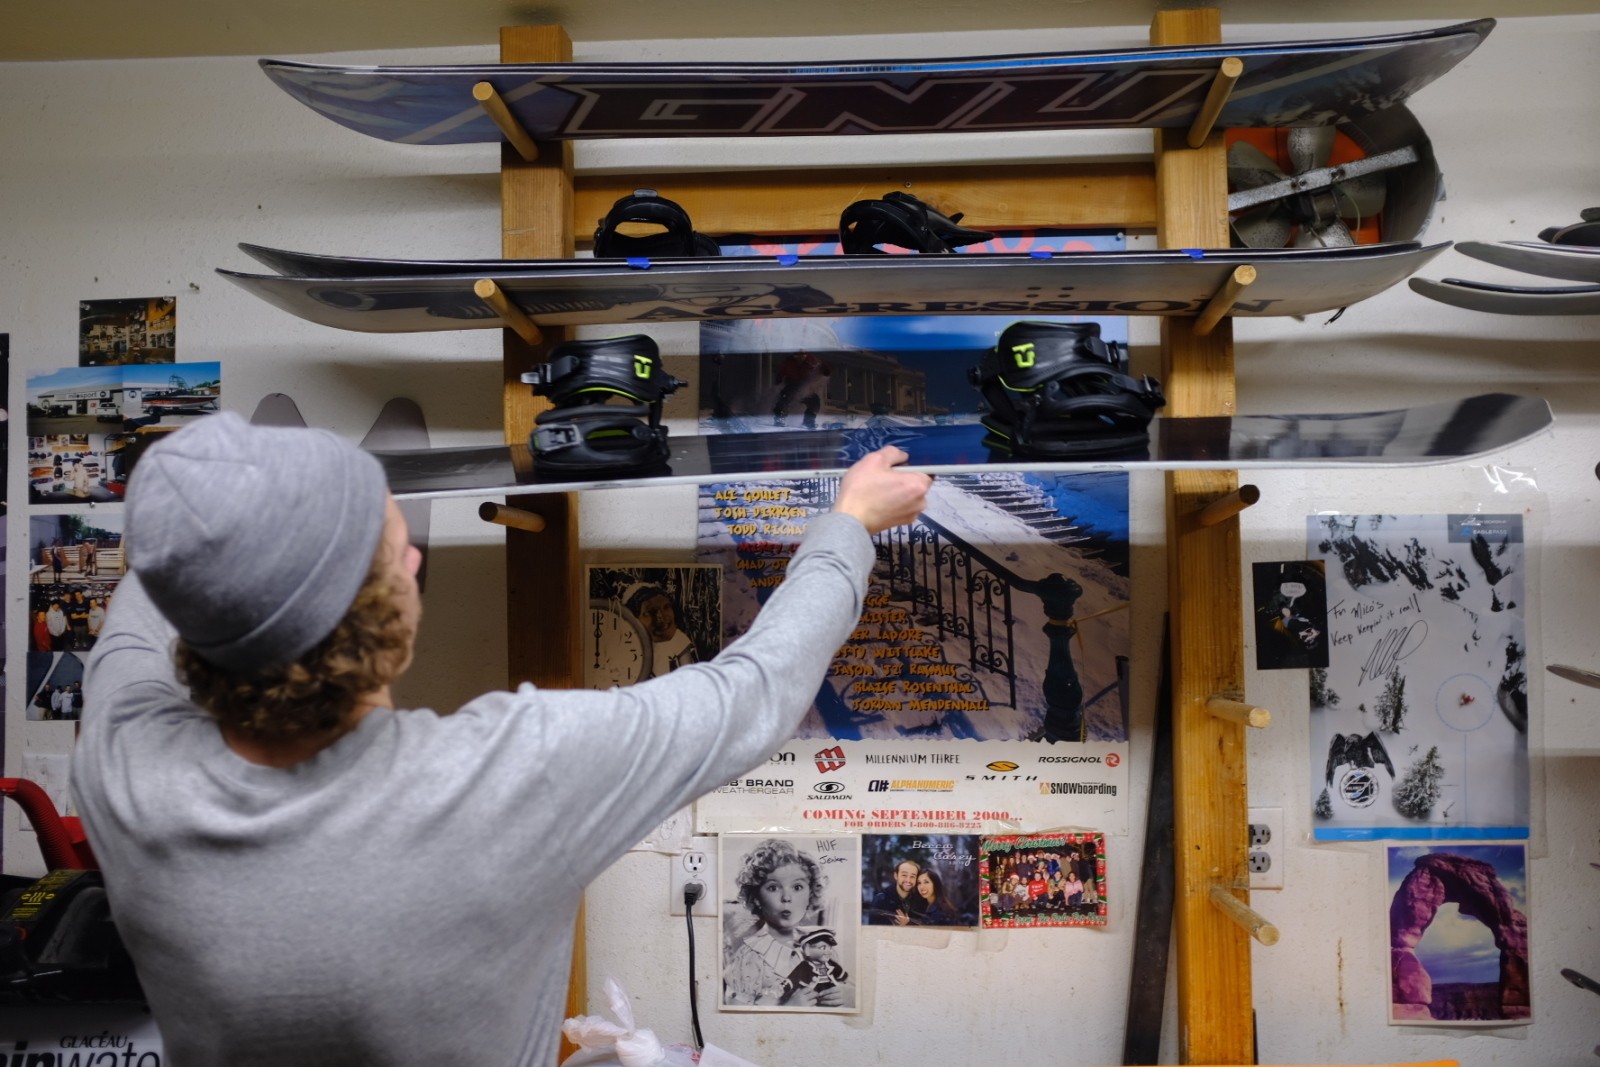 Tips for Prepping your Snowboard Gear